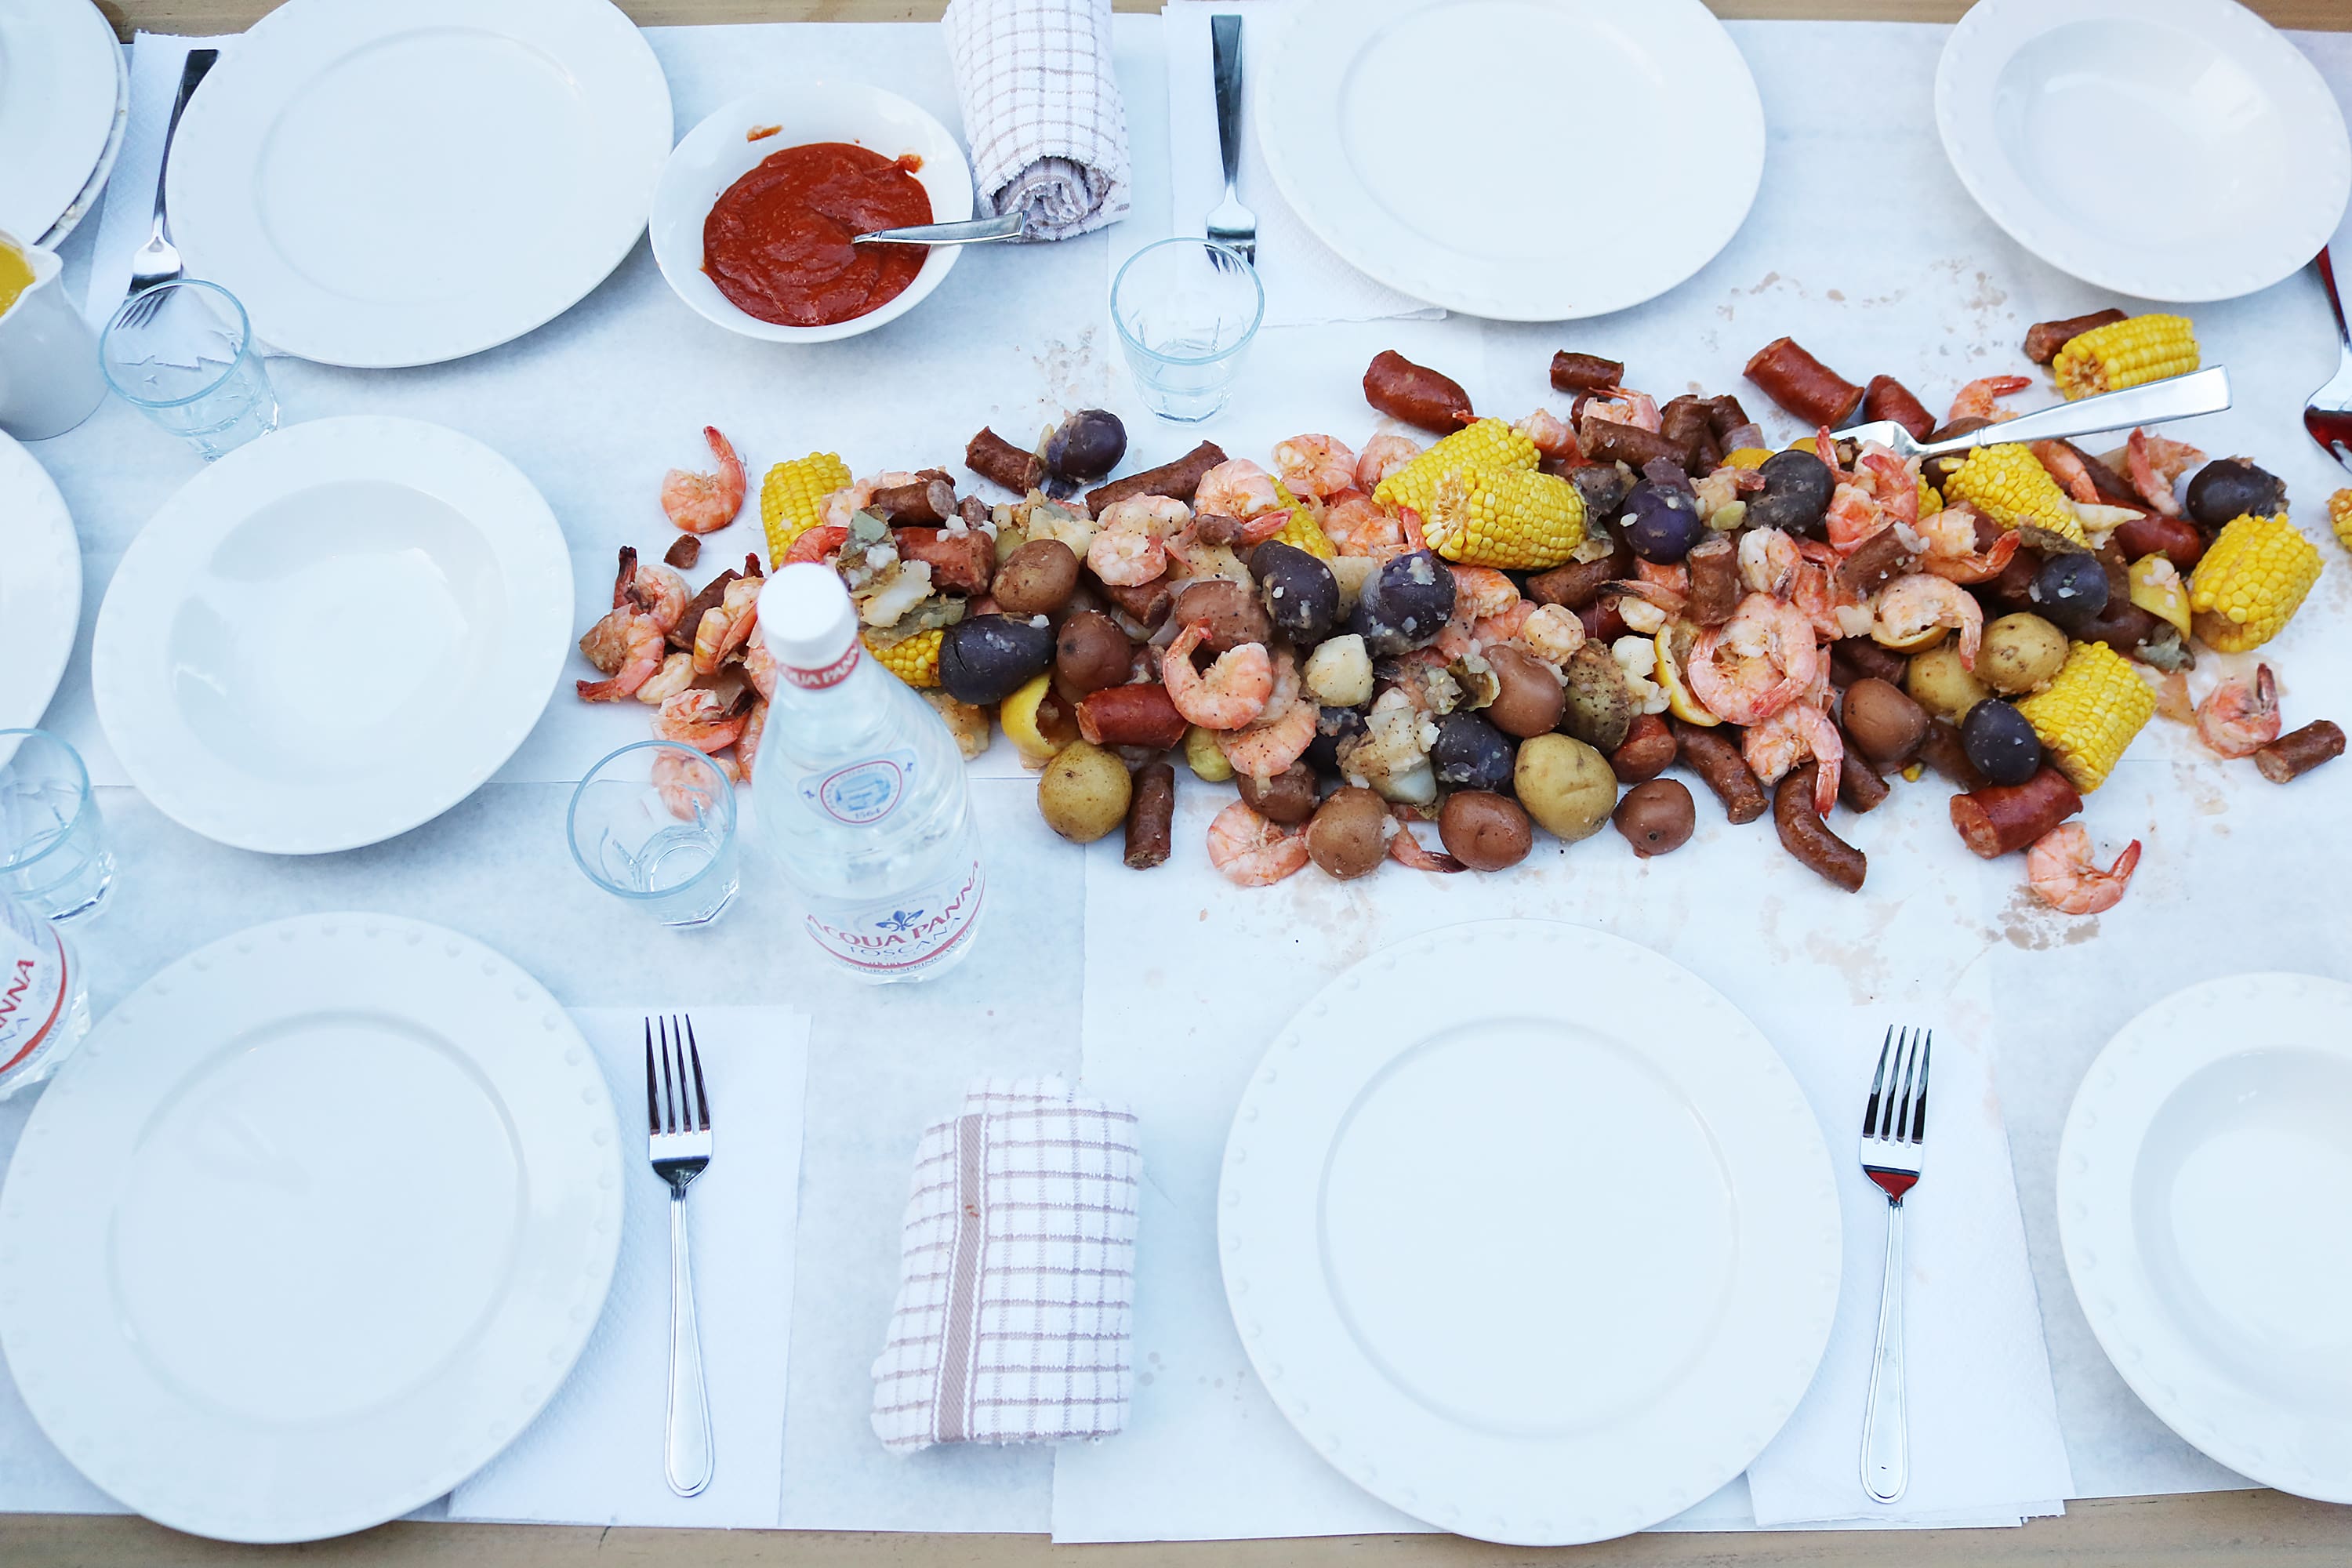 How to Throw a Low Country Boil || Darling Darleen #lowcountryboil #seafoodboil #darlingdarleen #darleenmeier